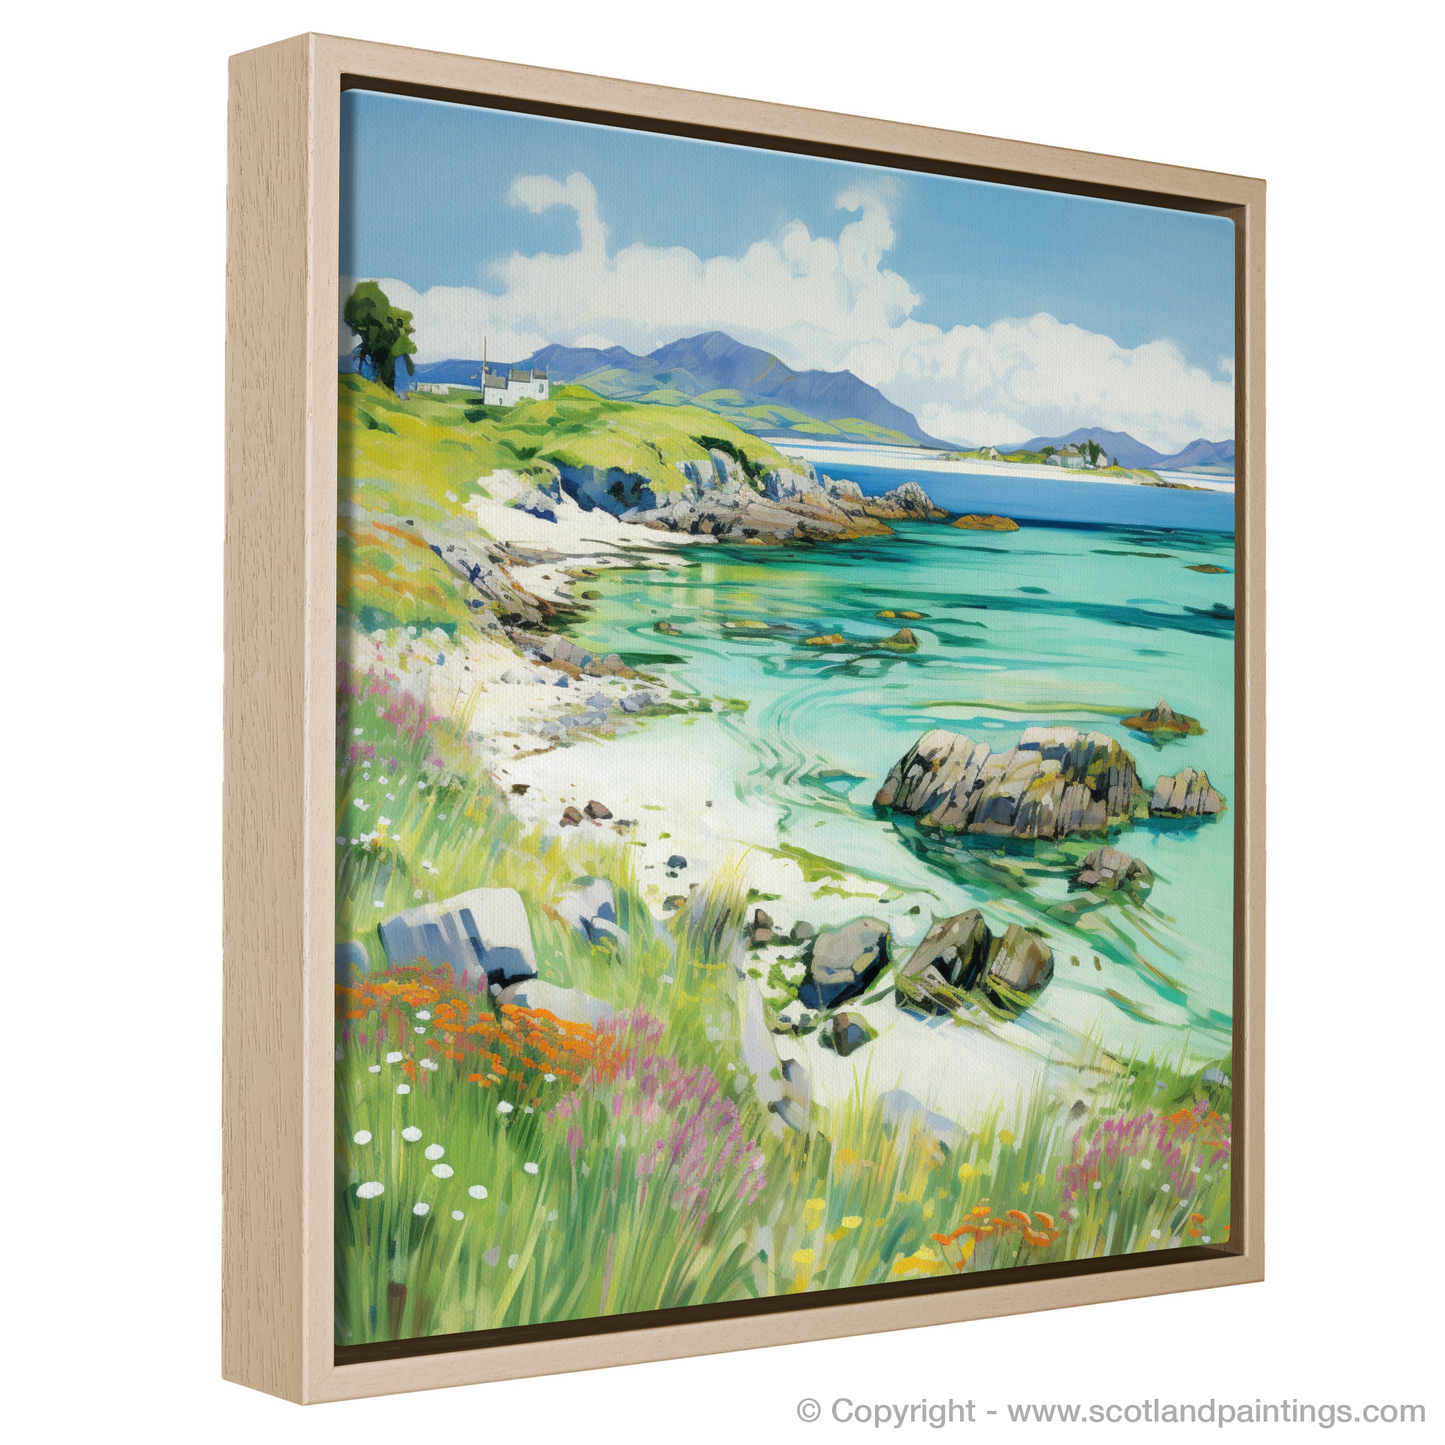 Painting and Art Print of Isle of Iona, Inner Hebrides in summer entitled "Summer Fervour on the Isle of Iona".